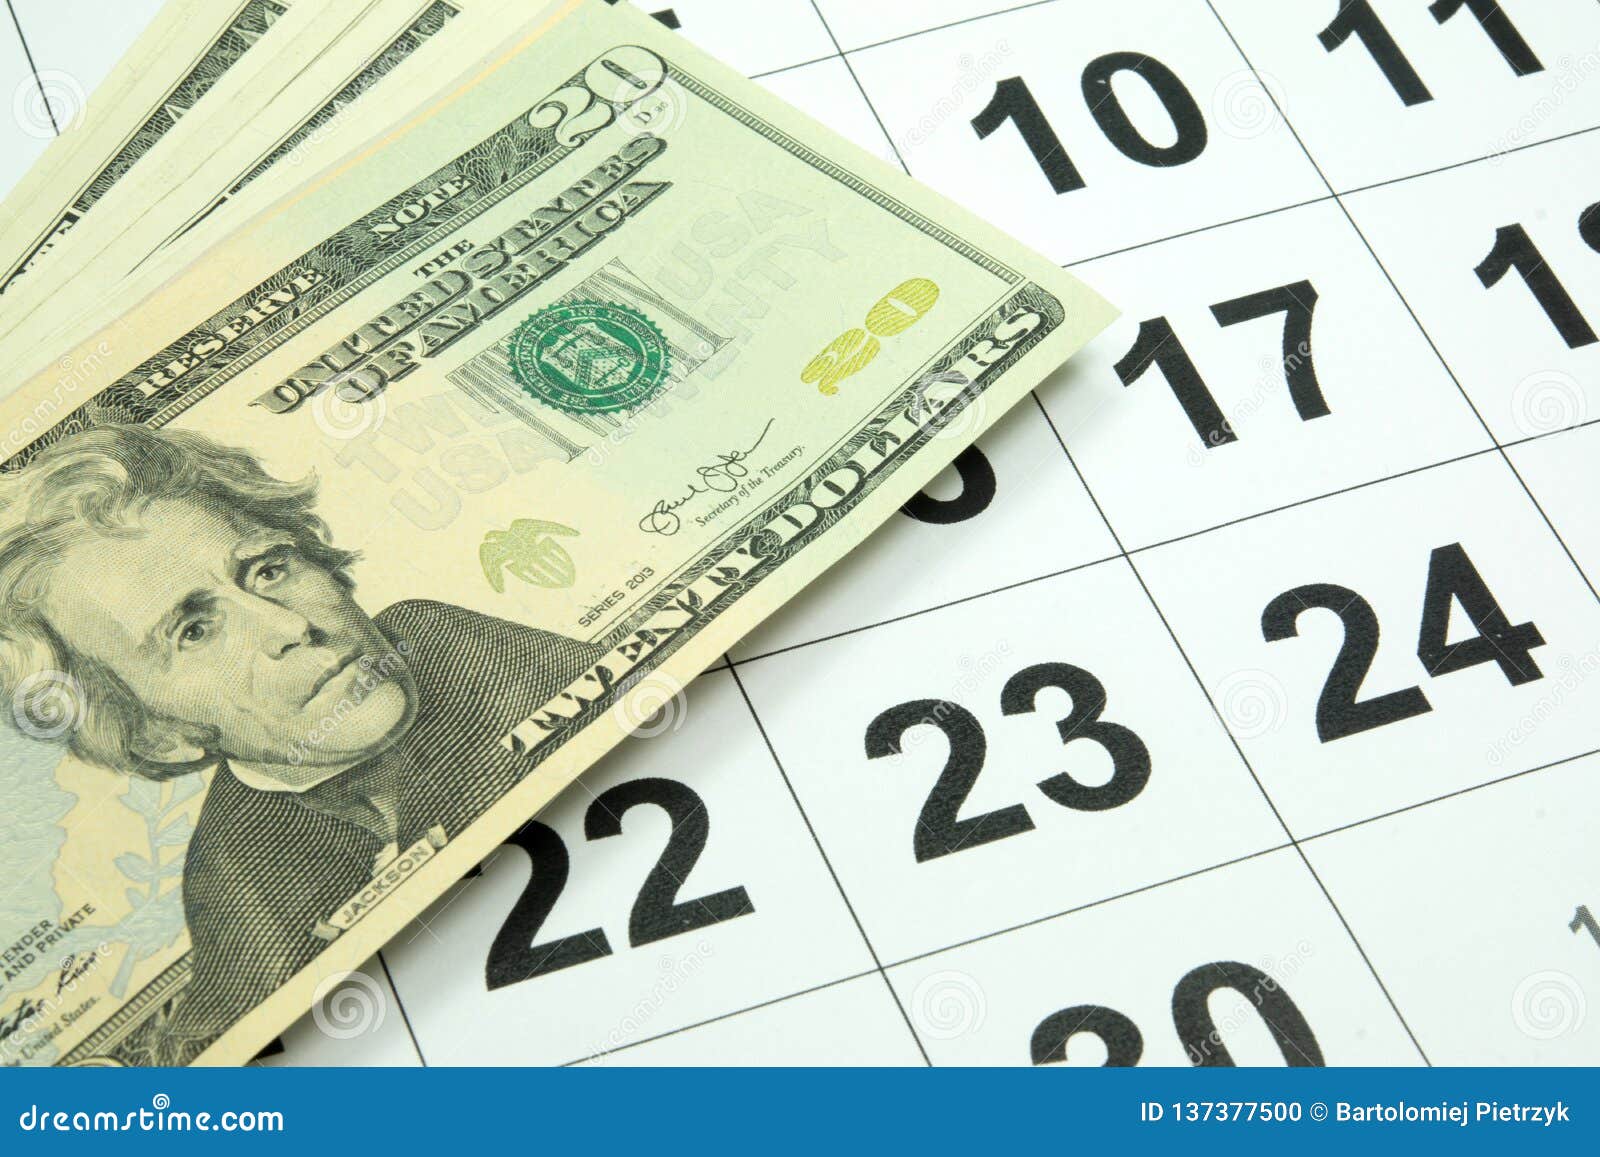 A Calendar and Dollars Money Stock Photo Image of cash 137377500